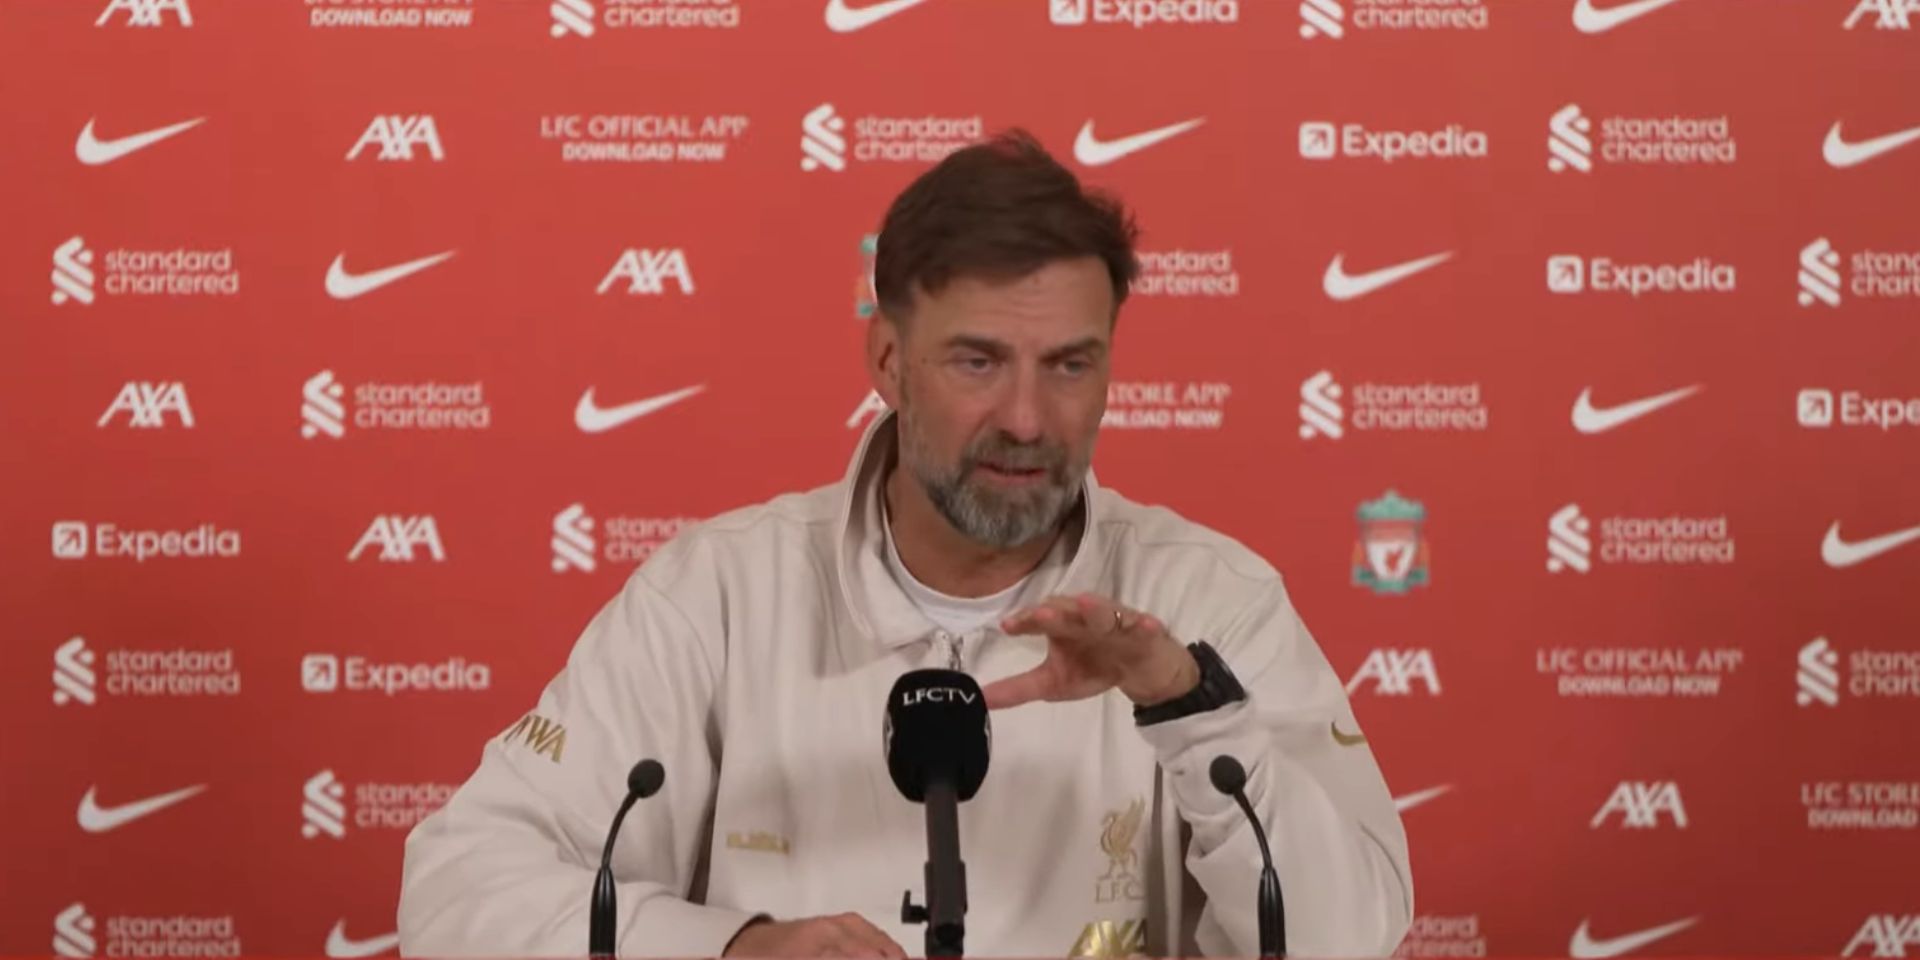 (Video) Klopp on ‘most intense week of my life’ ahead of emotional farewell